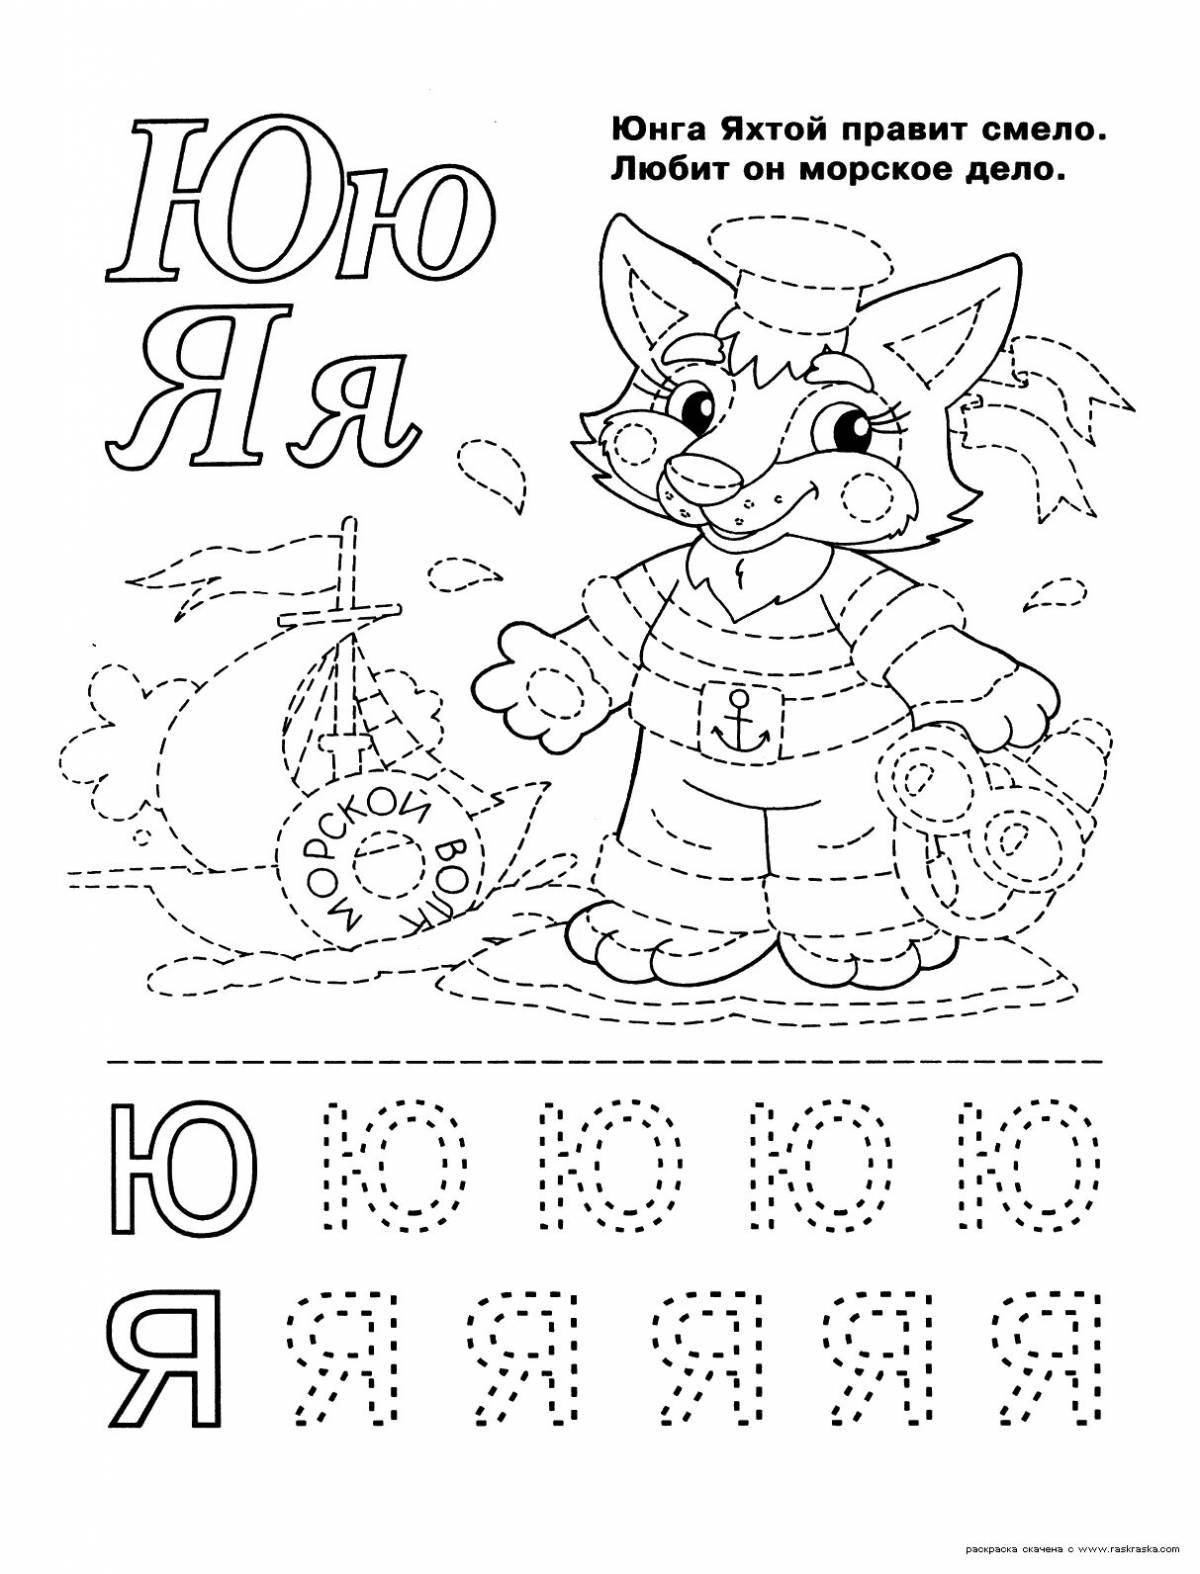 Fun coloring book with alphabet for 4-5 year olds